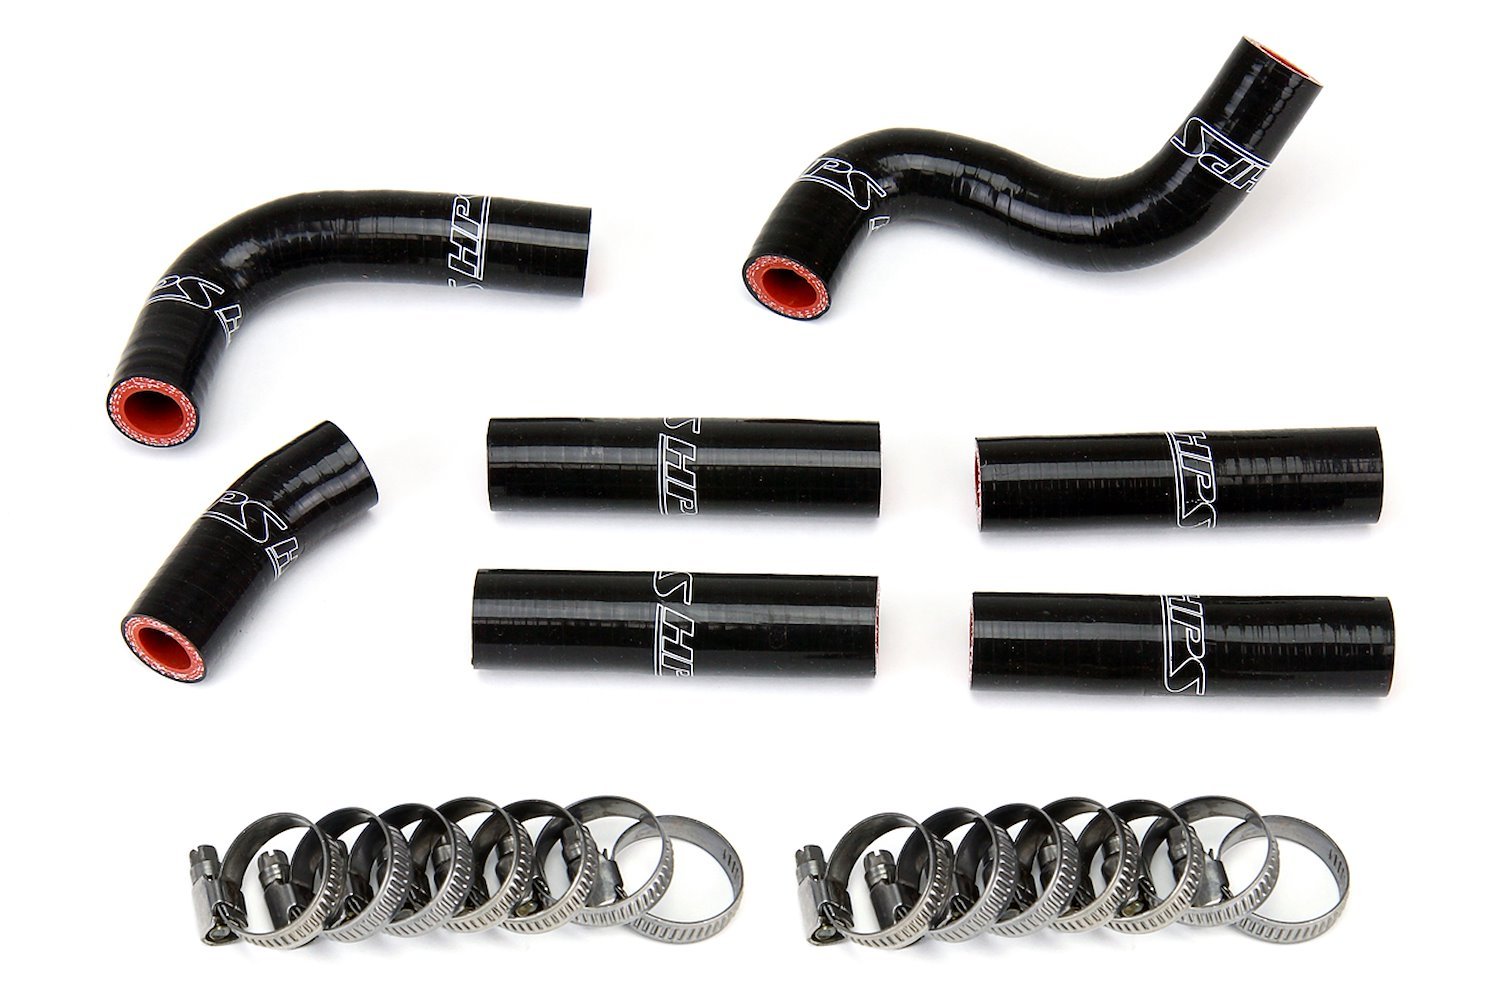 57-1344-BLK Heater Hose Kit, High-Temp 3-Ply Reinforced Silicone, Replace OEM Rubber Heater Coolant Hoses